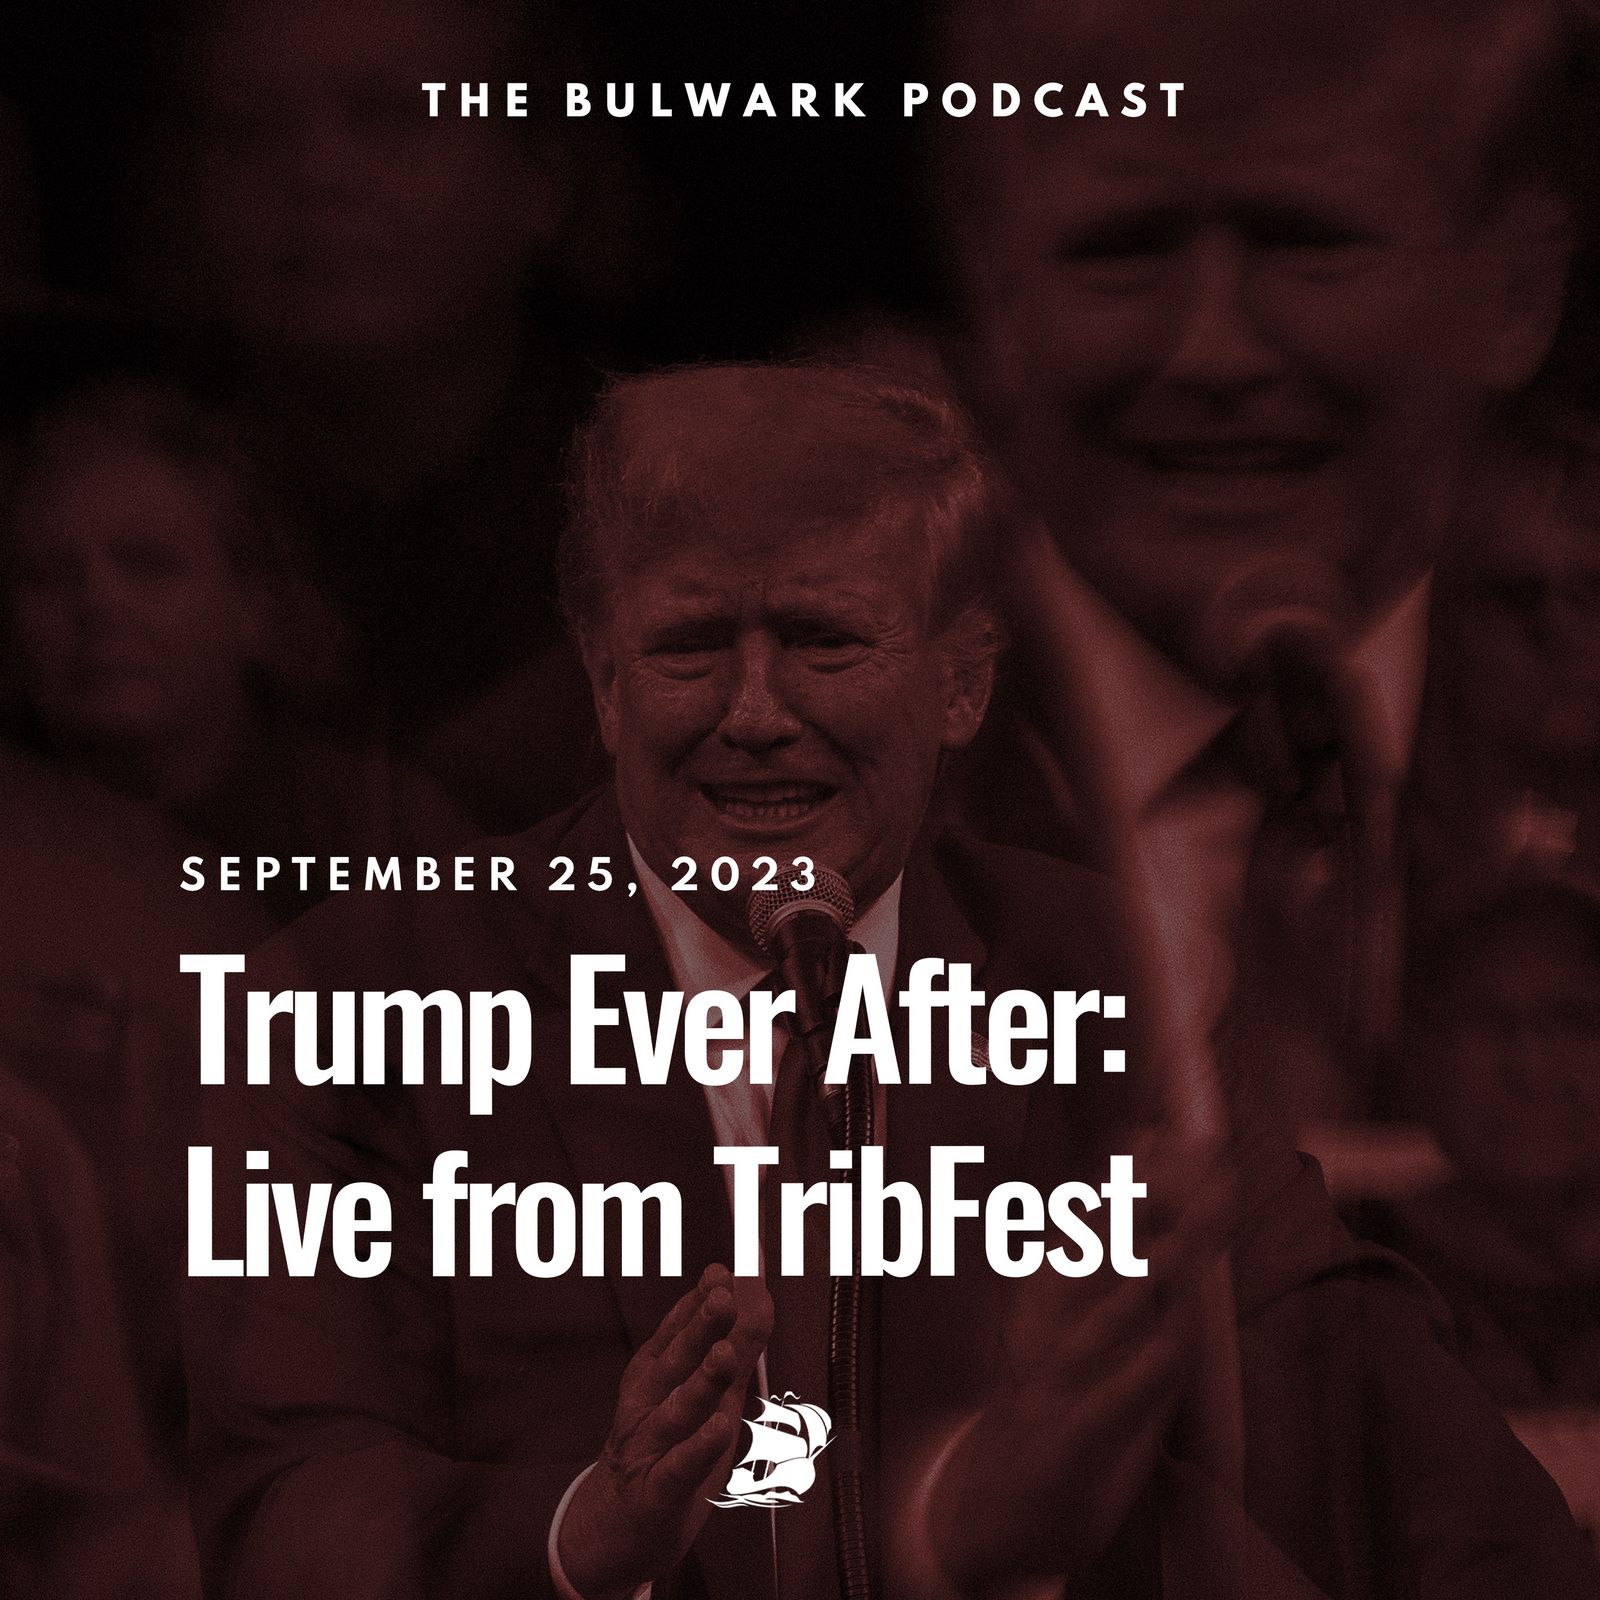 Trump Ever After: Live from TribFest